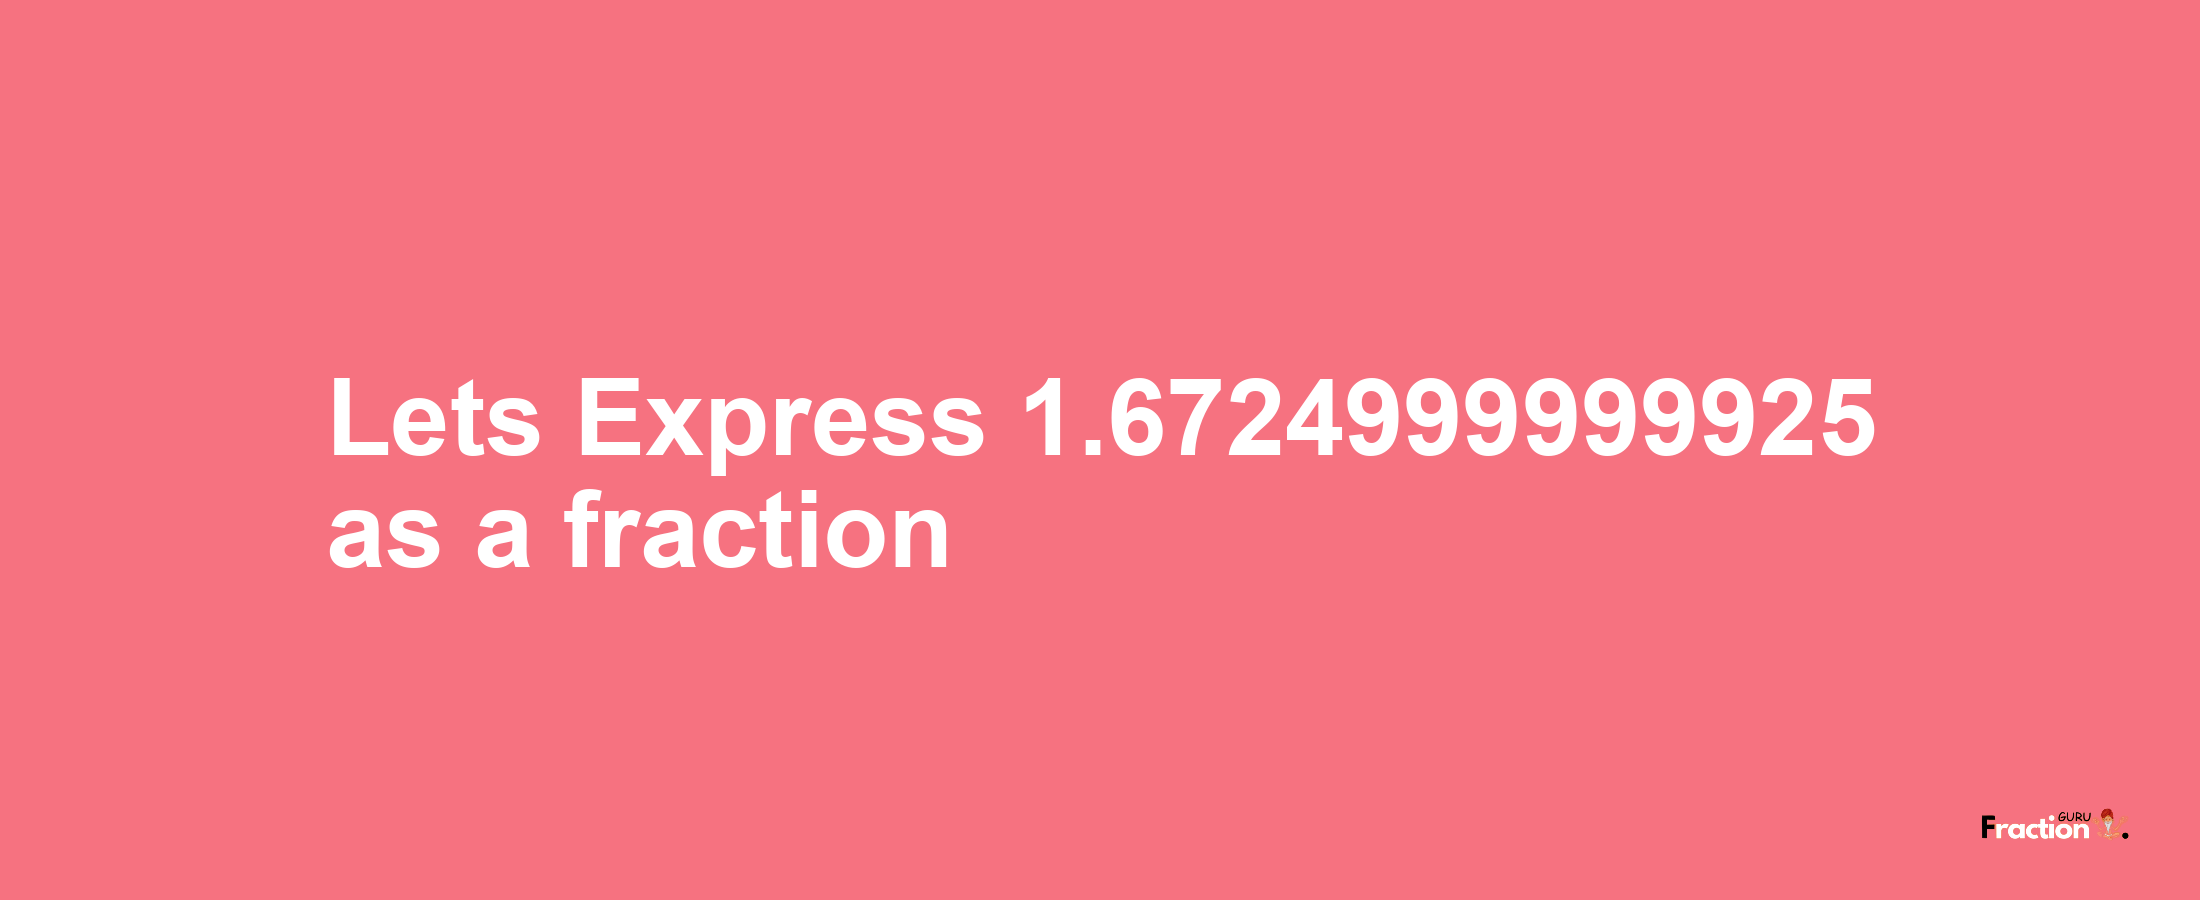 Lets Express 1.6724999999925 as afraction